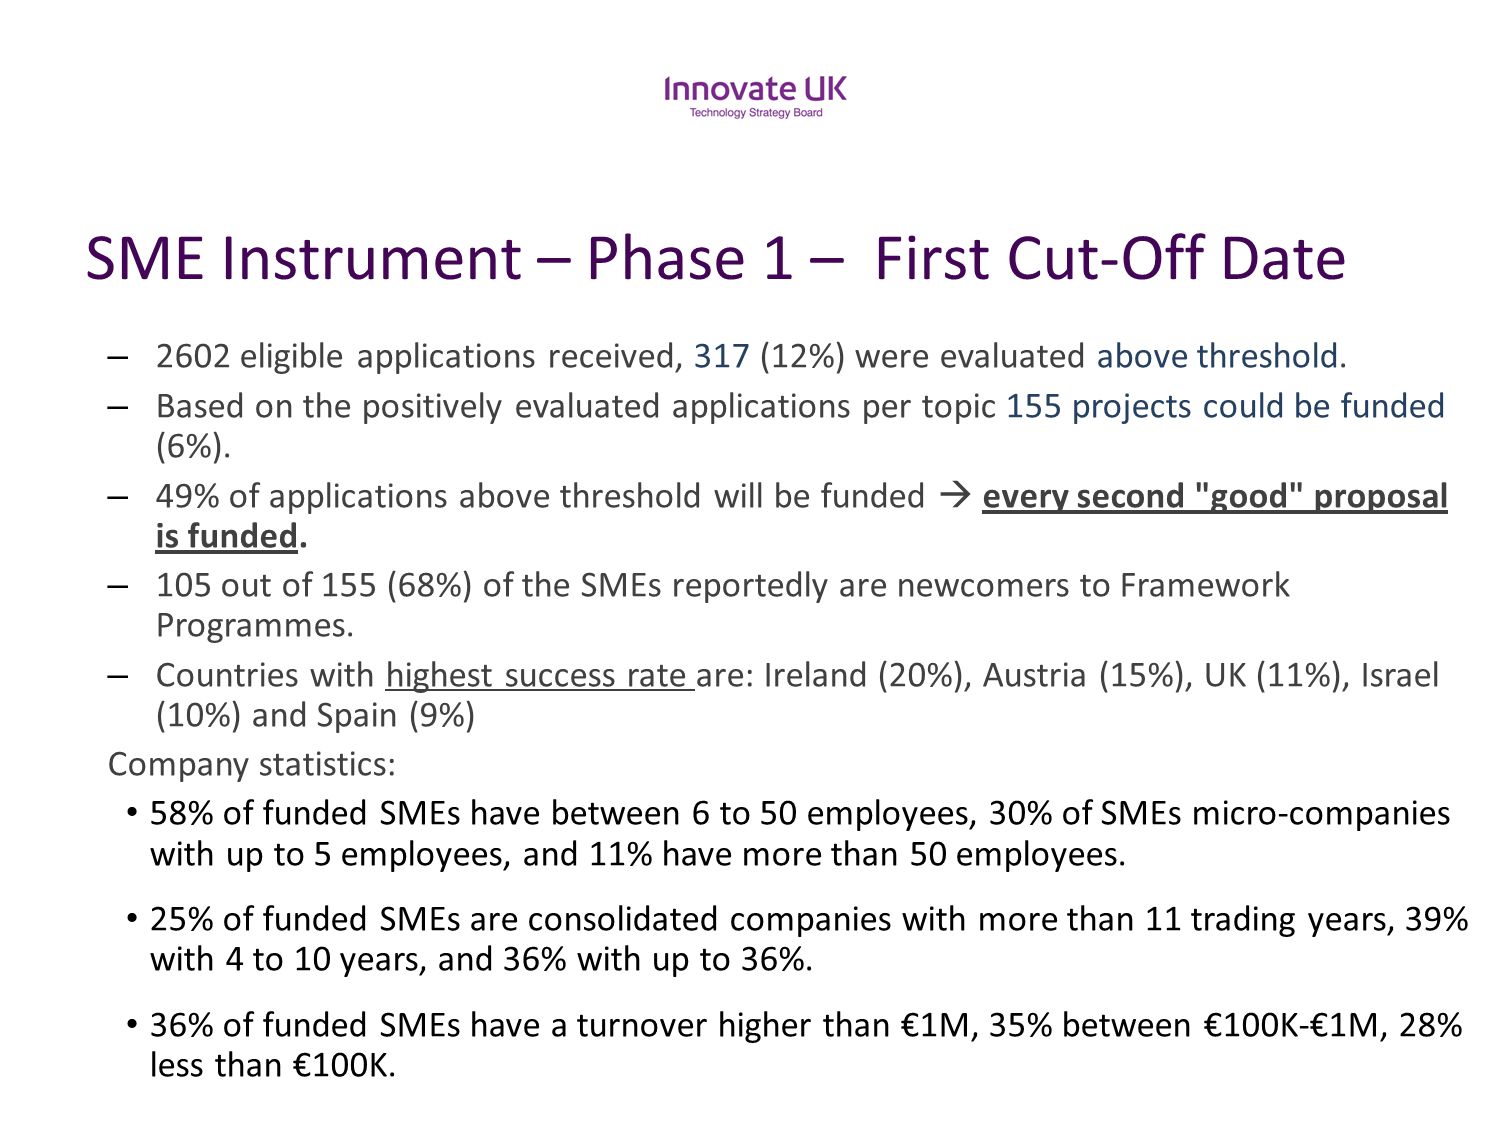 SME Instrument in Horizon 2020 – An overview - ppt download